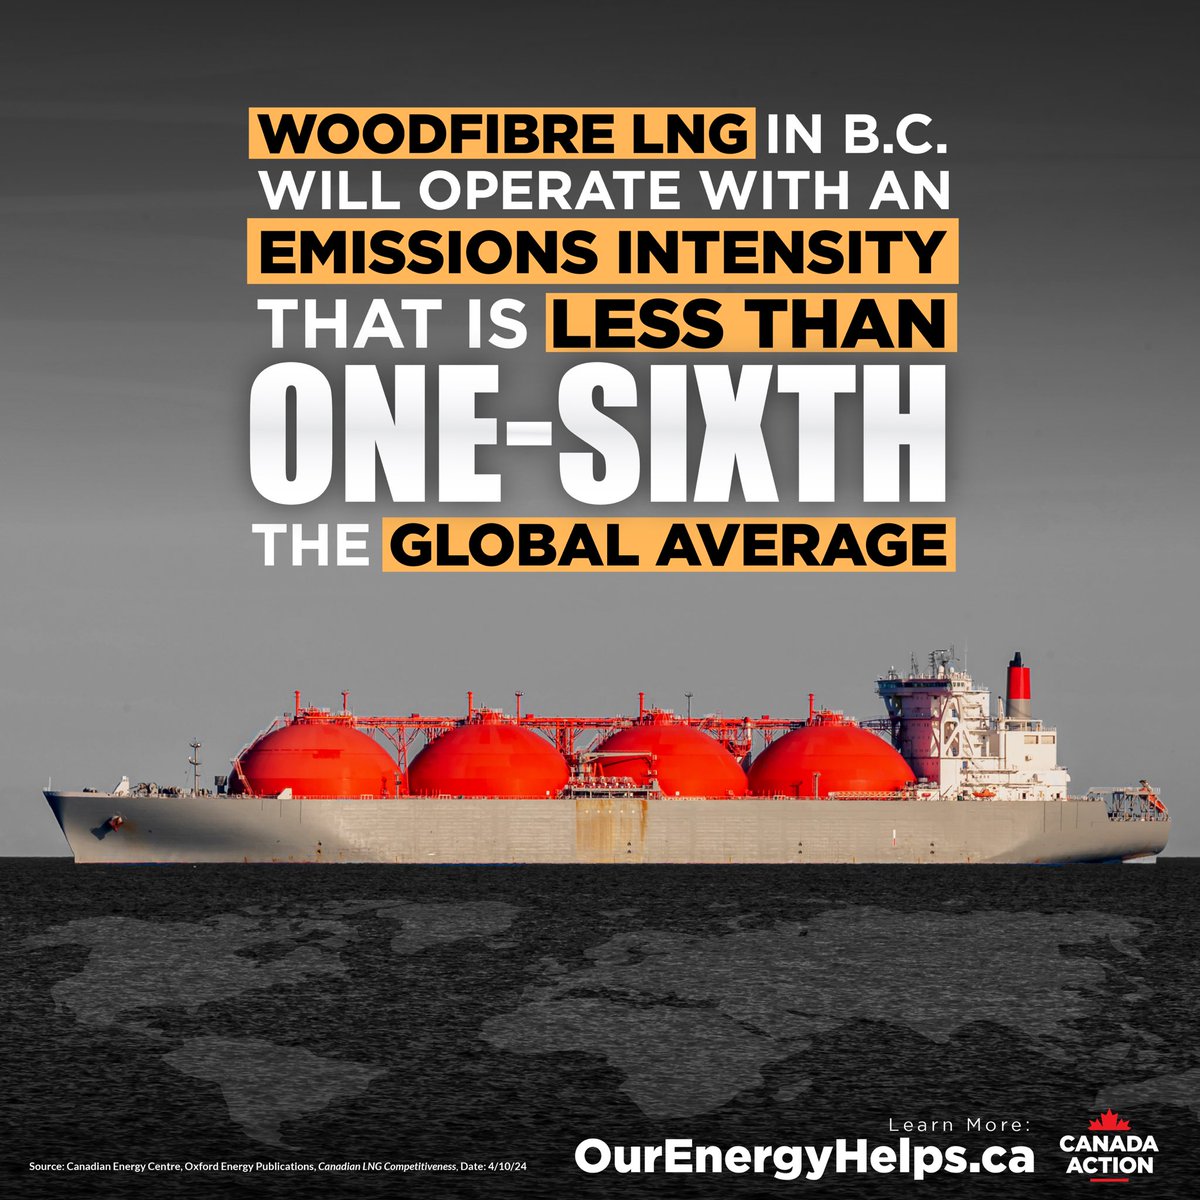 Woodfibre LNG is a win for local families and the global environment. #bclng